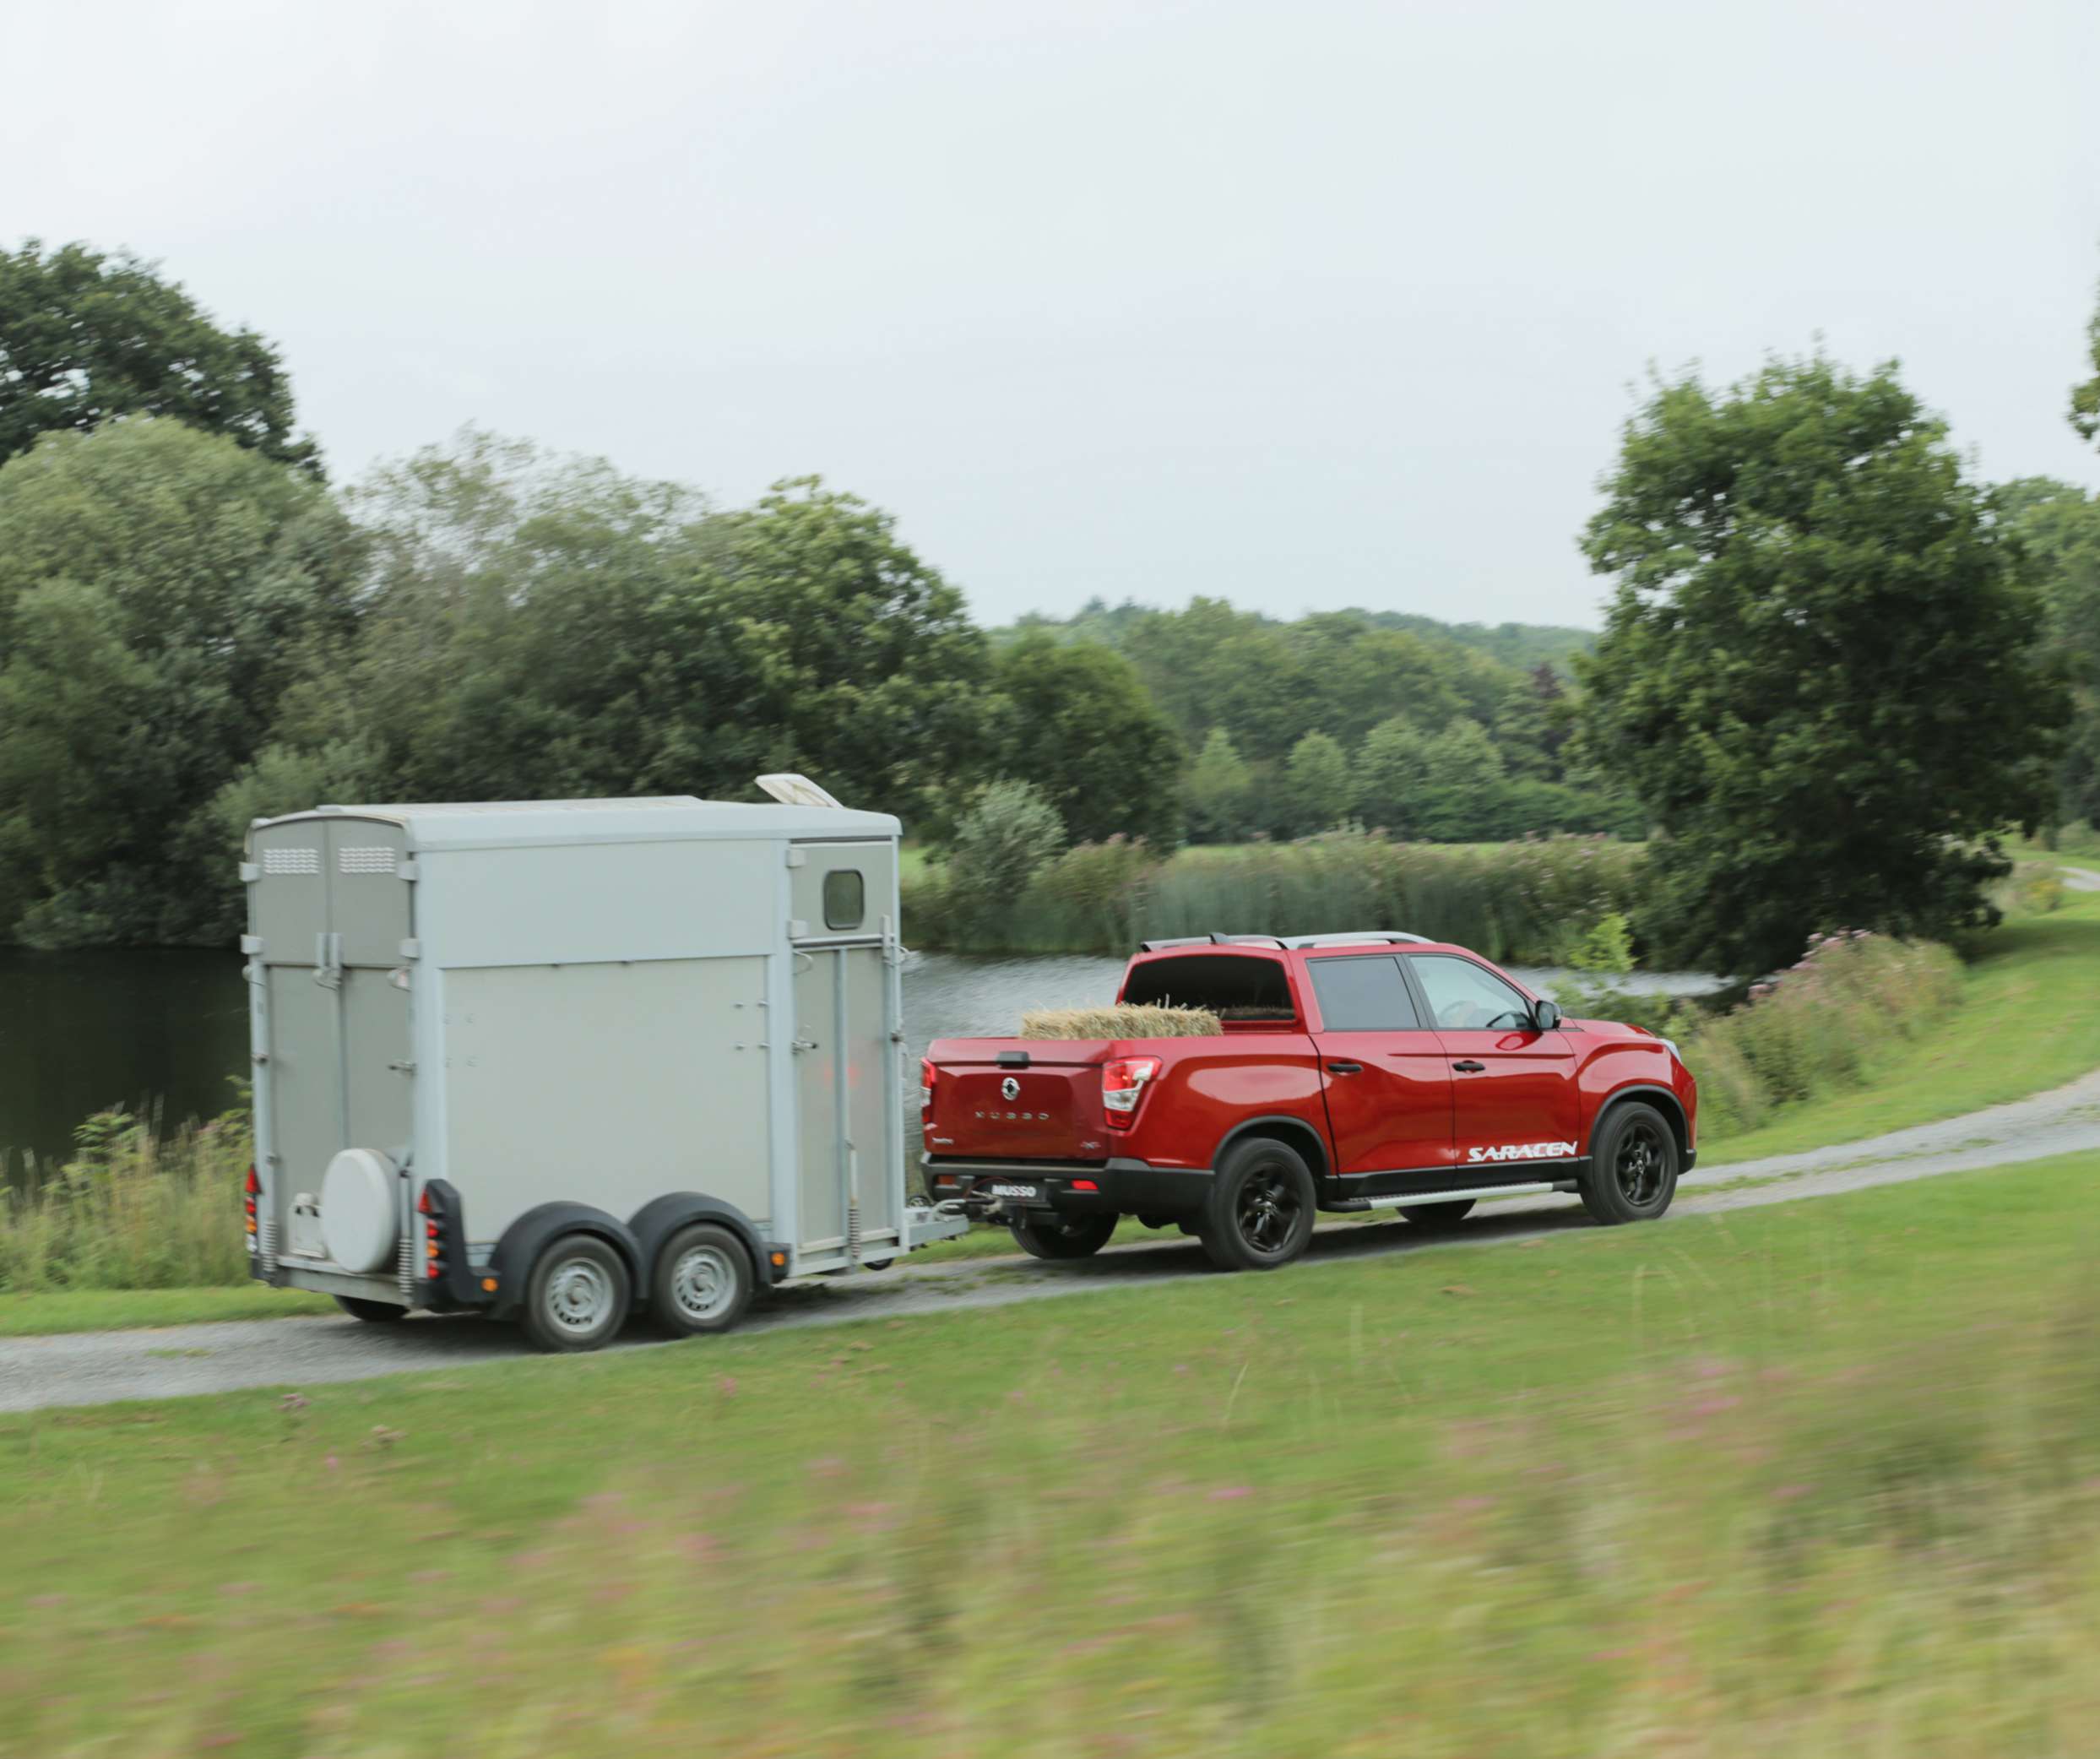 New SsangYong Musso photo shoot - towing with flat bed load